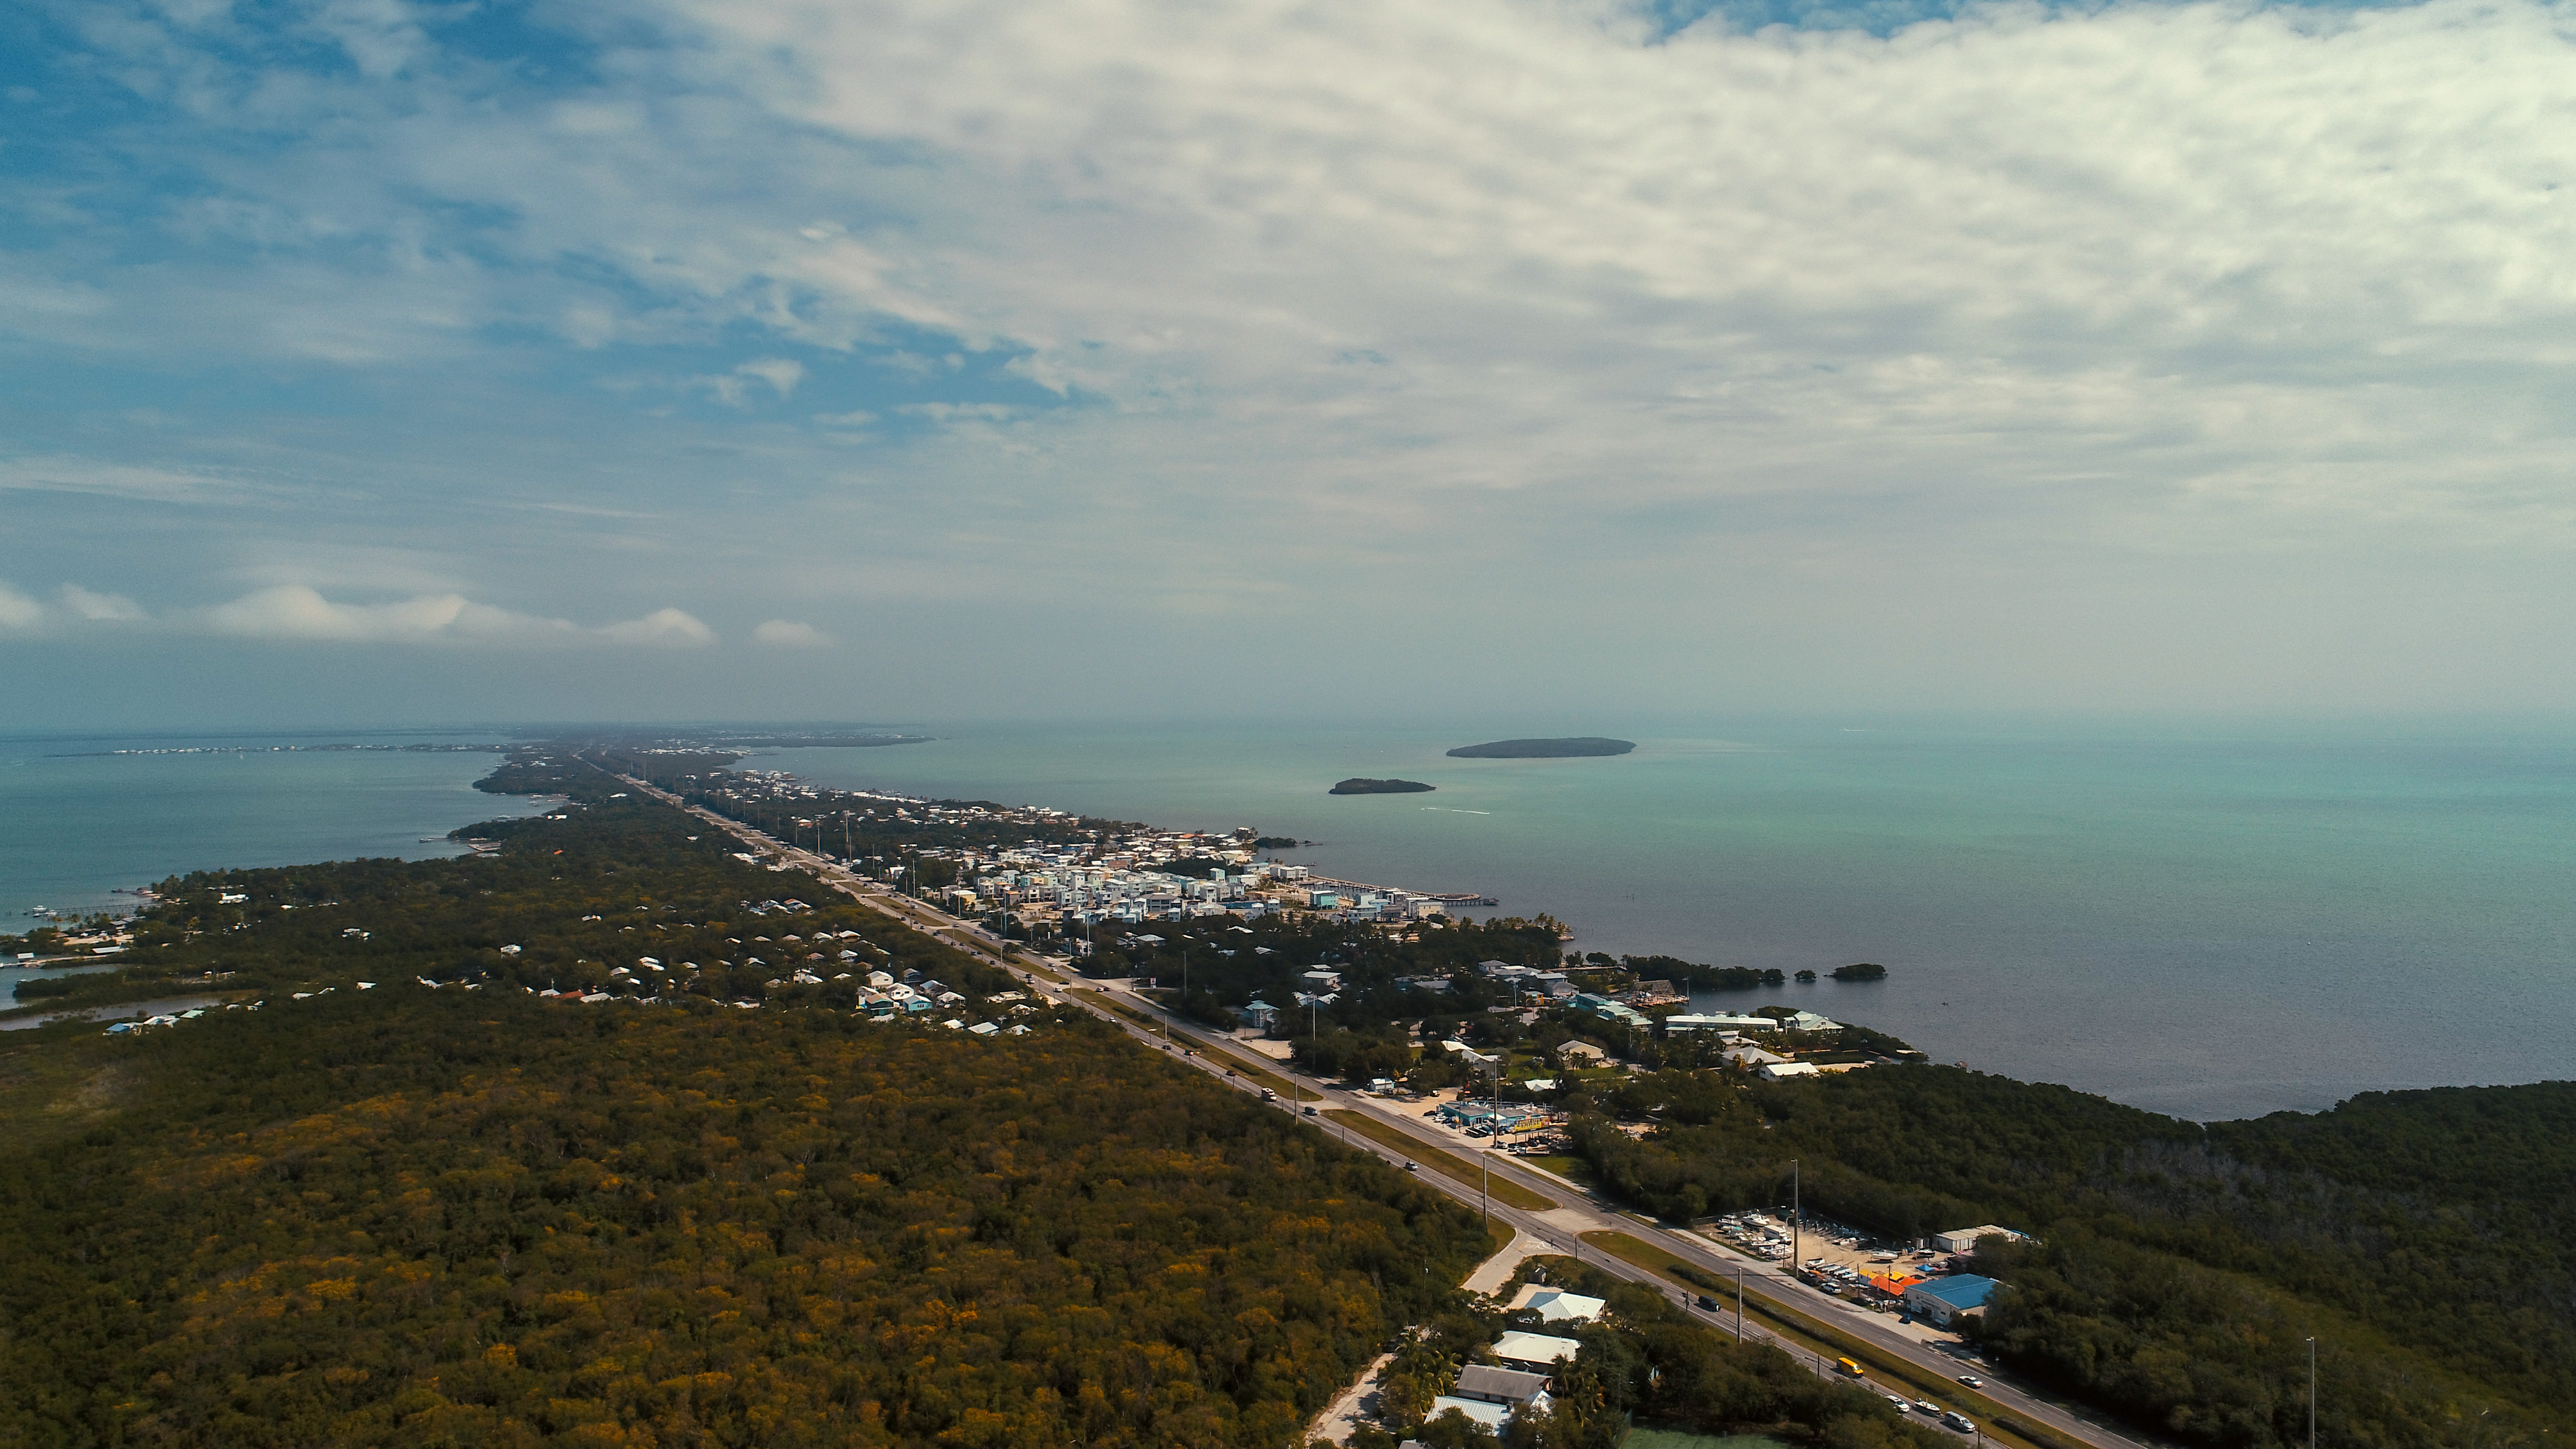 Aerial Photo of Key Largo, with the Ocean and multiple homes visible in the frame